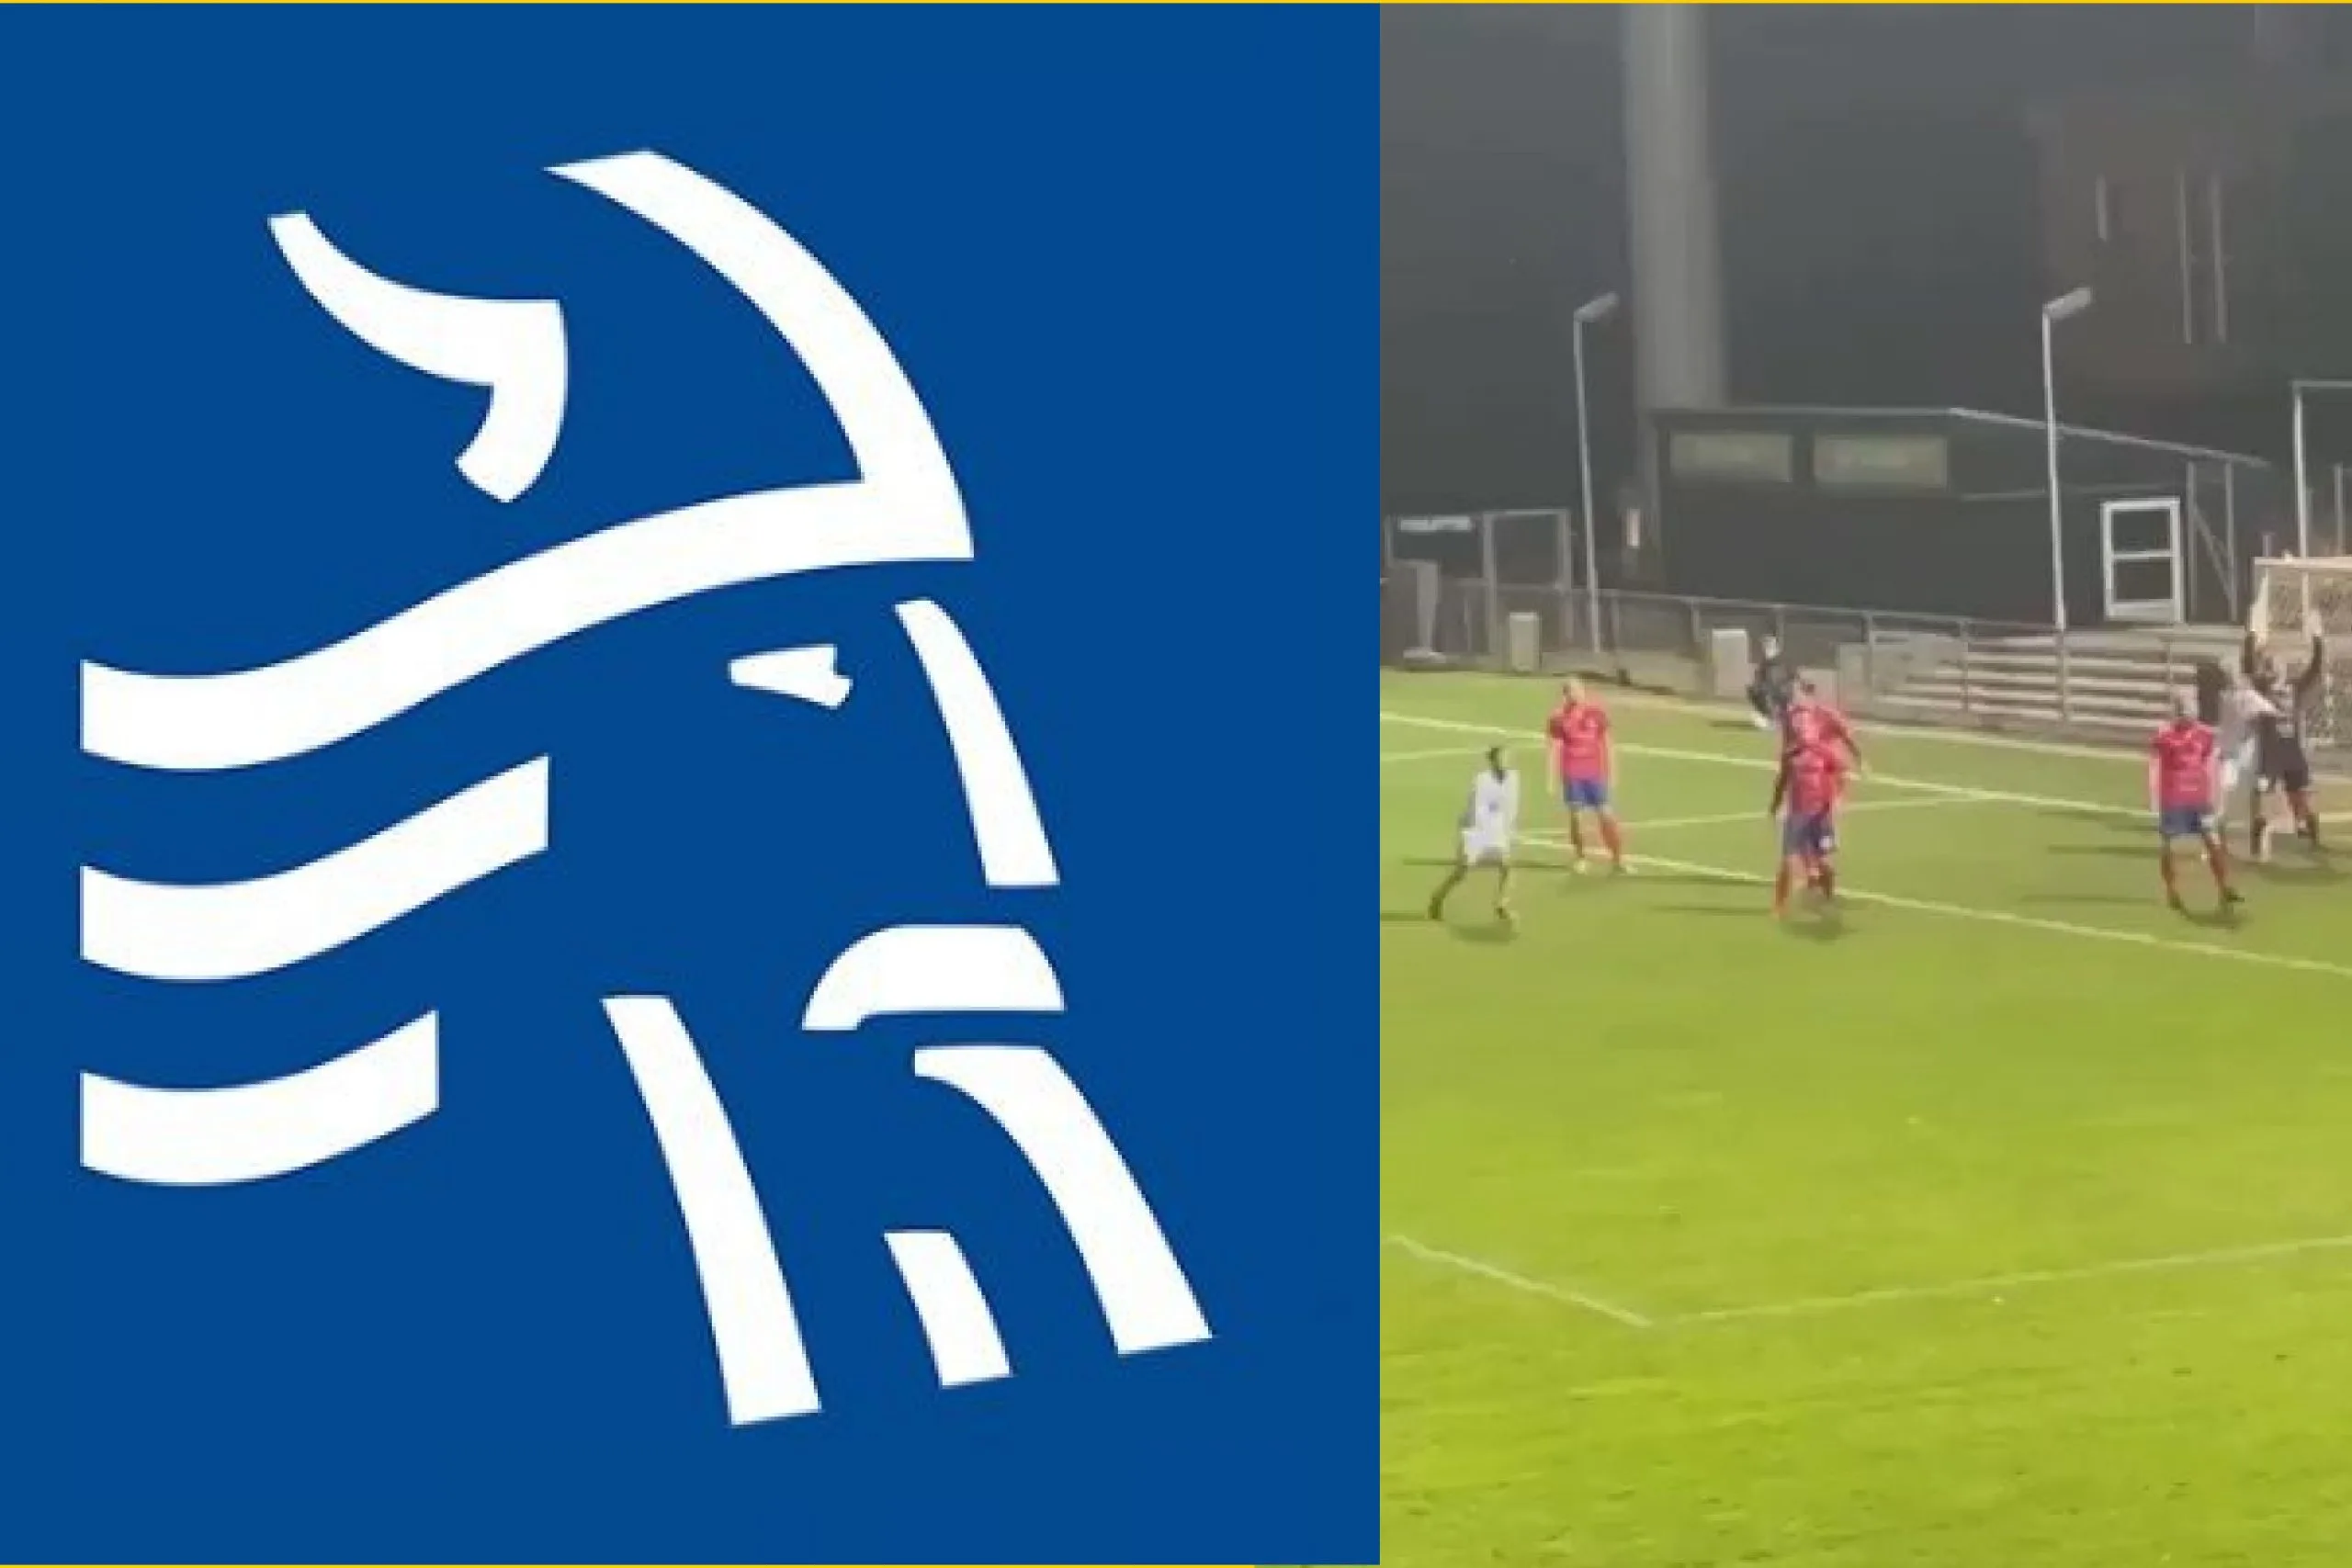 Bloody Hell - Nicolai Geertsen smashes in unreal double-volley goal for Lyngby Boldklub